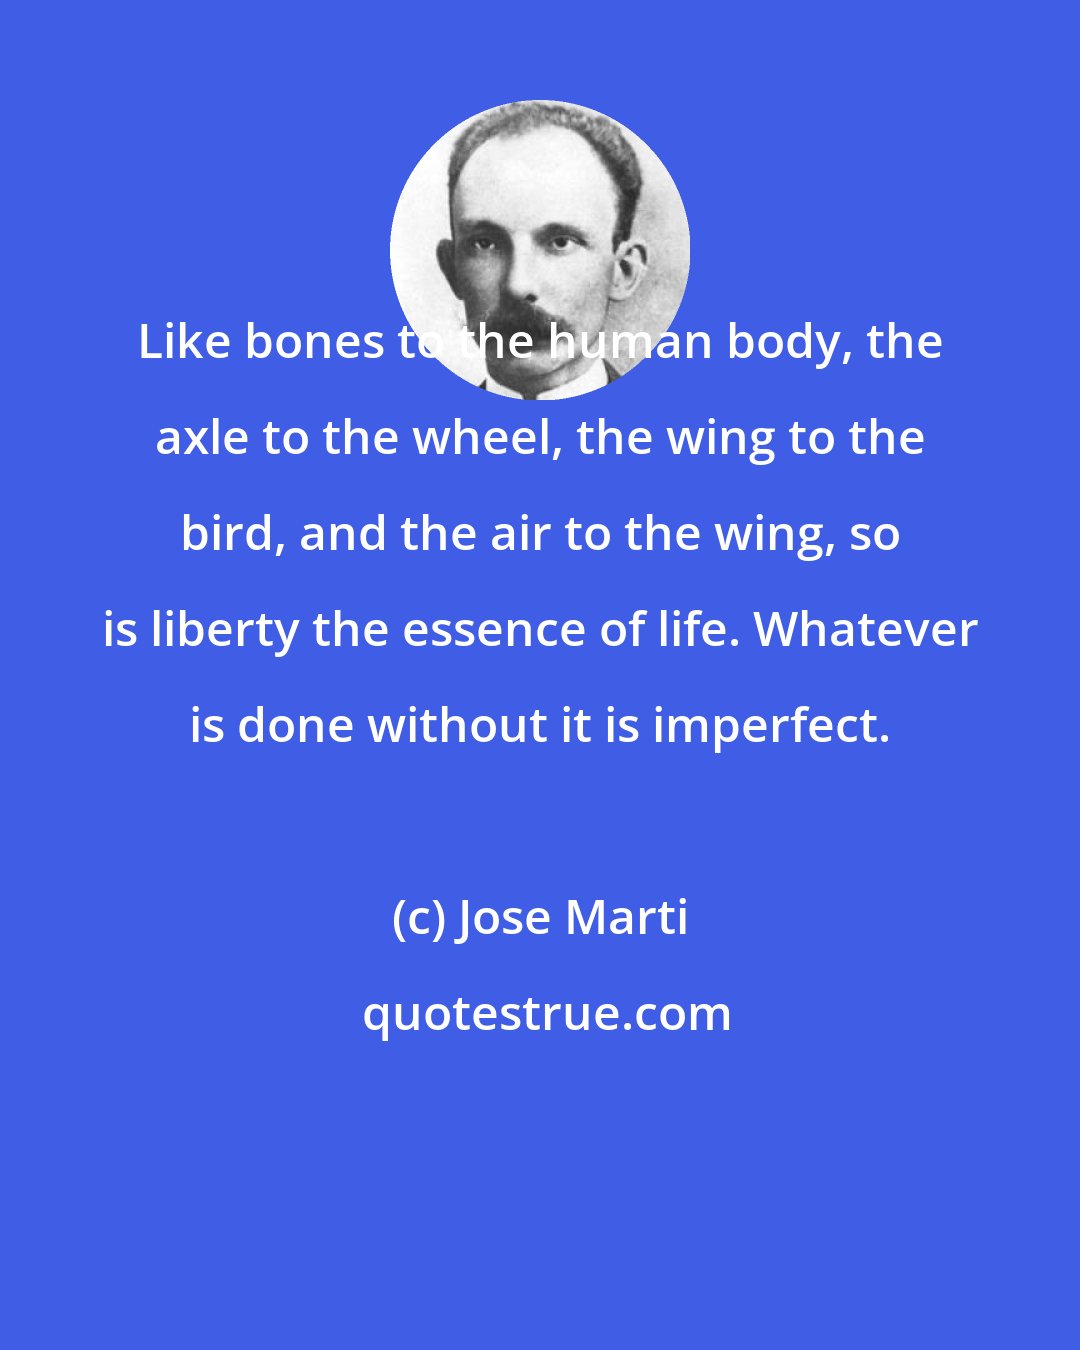 Jose Marti: Like bones to the human body, the axle to the wheel, the wing to the bird, and the air to the wing, so is liberty the essence of life. Whatever is done without it is imperfect.